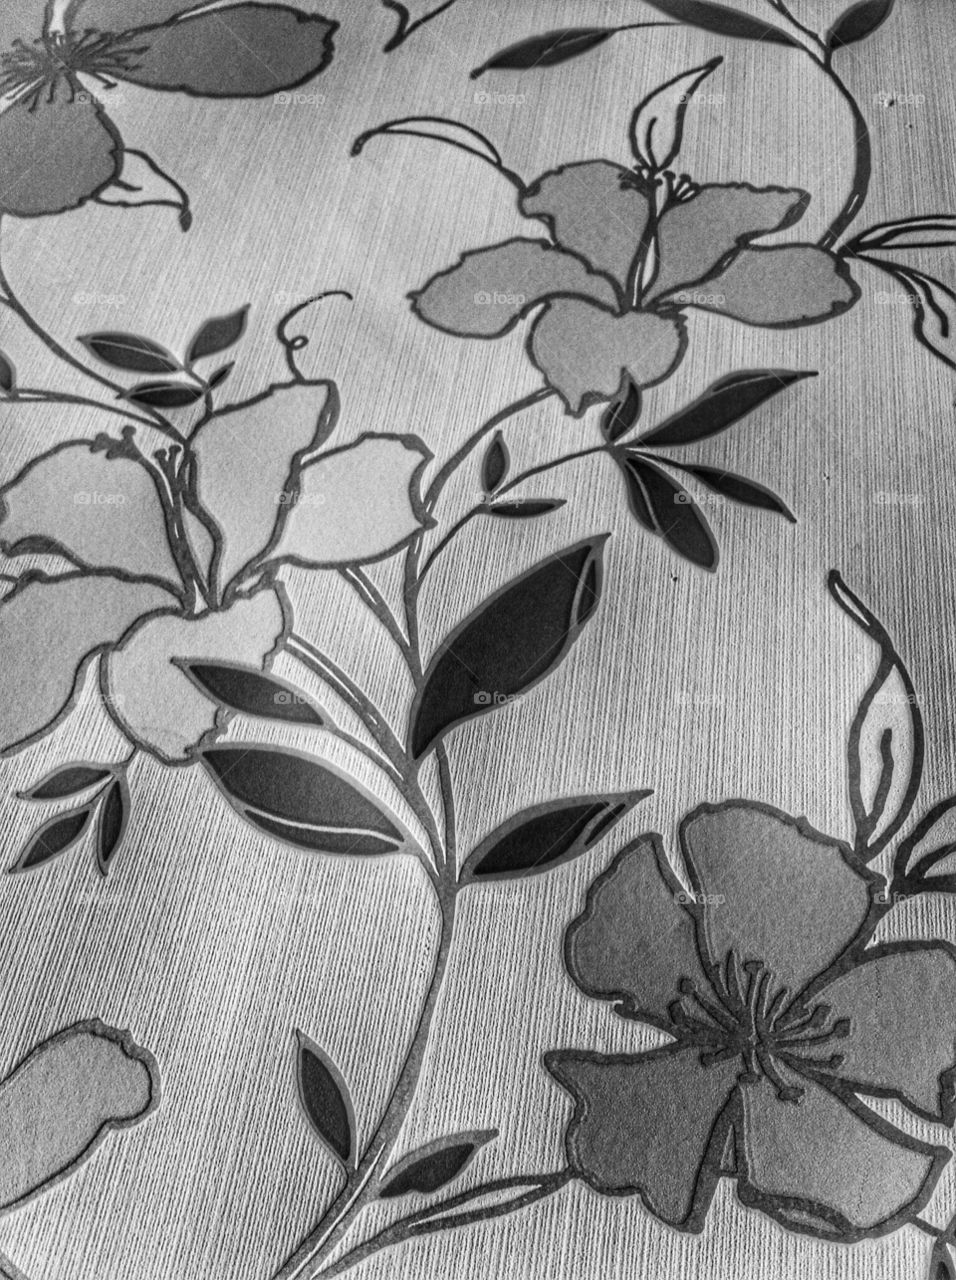 Close up of wallpaper design in black and white.